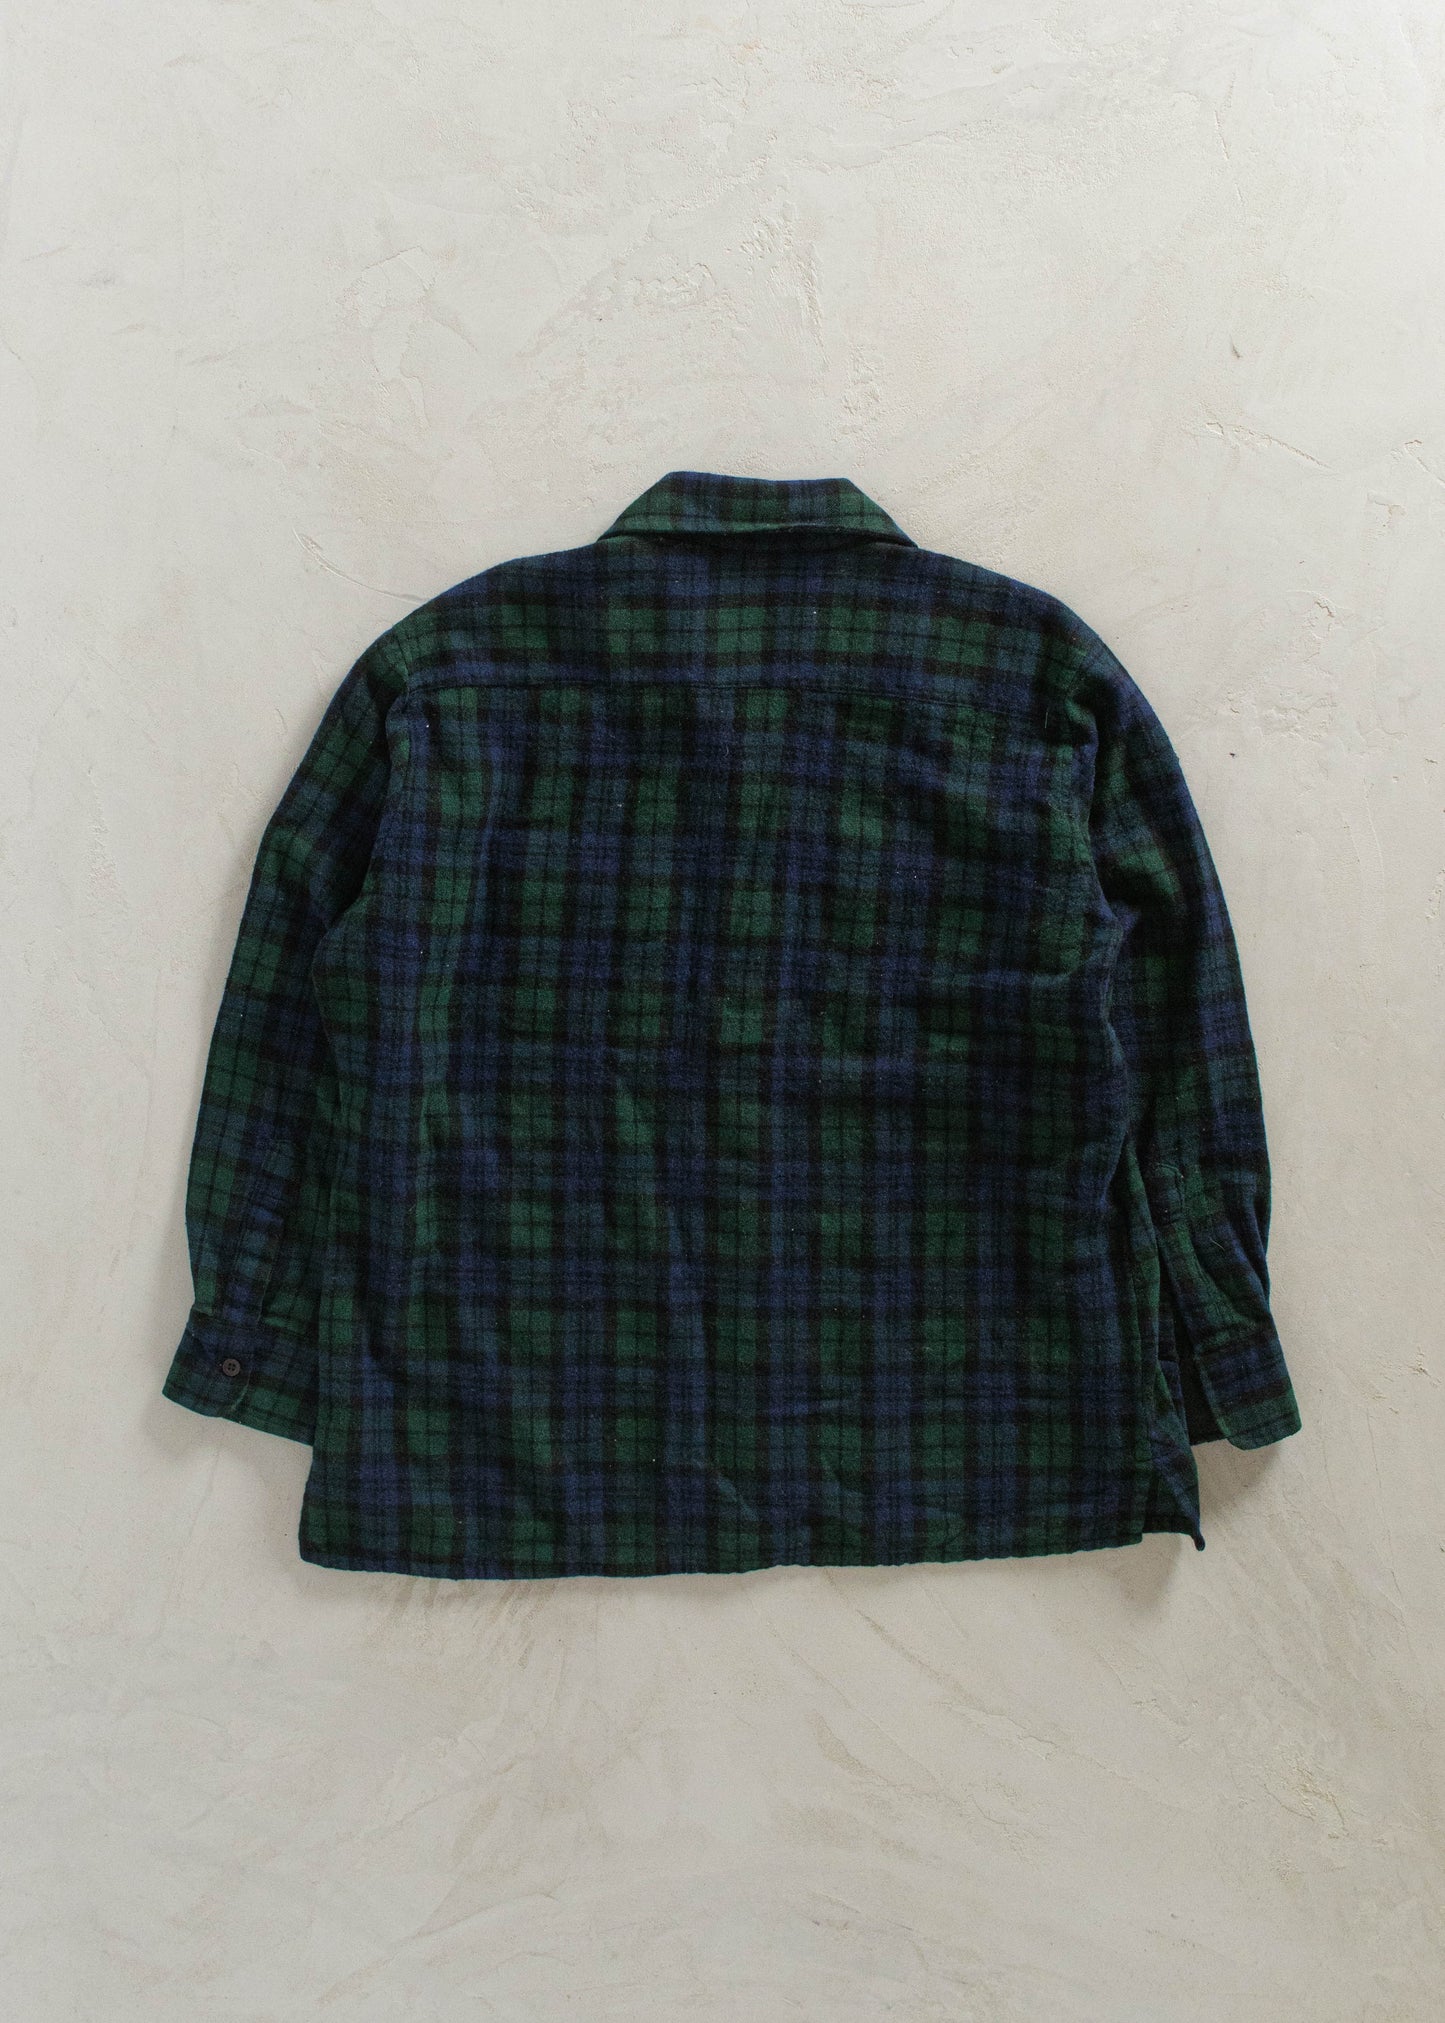 1990s Richman Brothers Wool Flannel Button Up Shirt Size L/XL